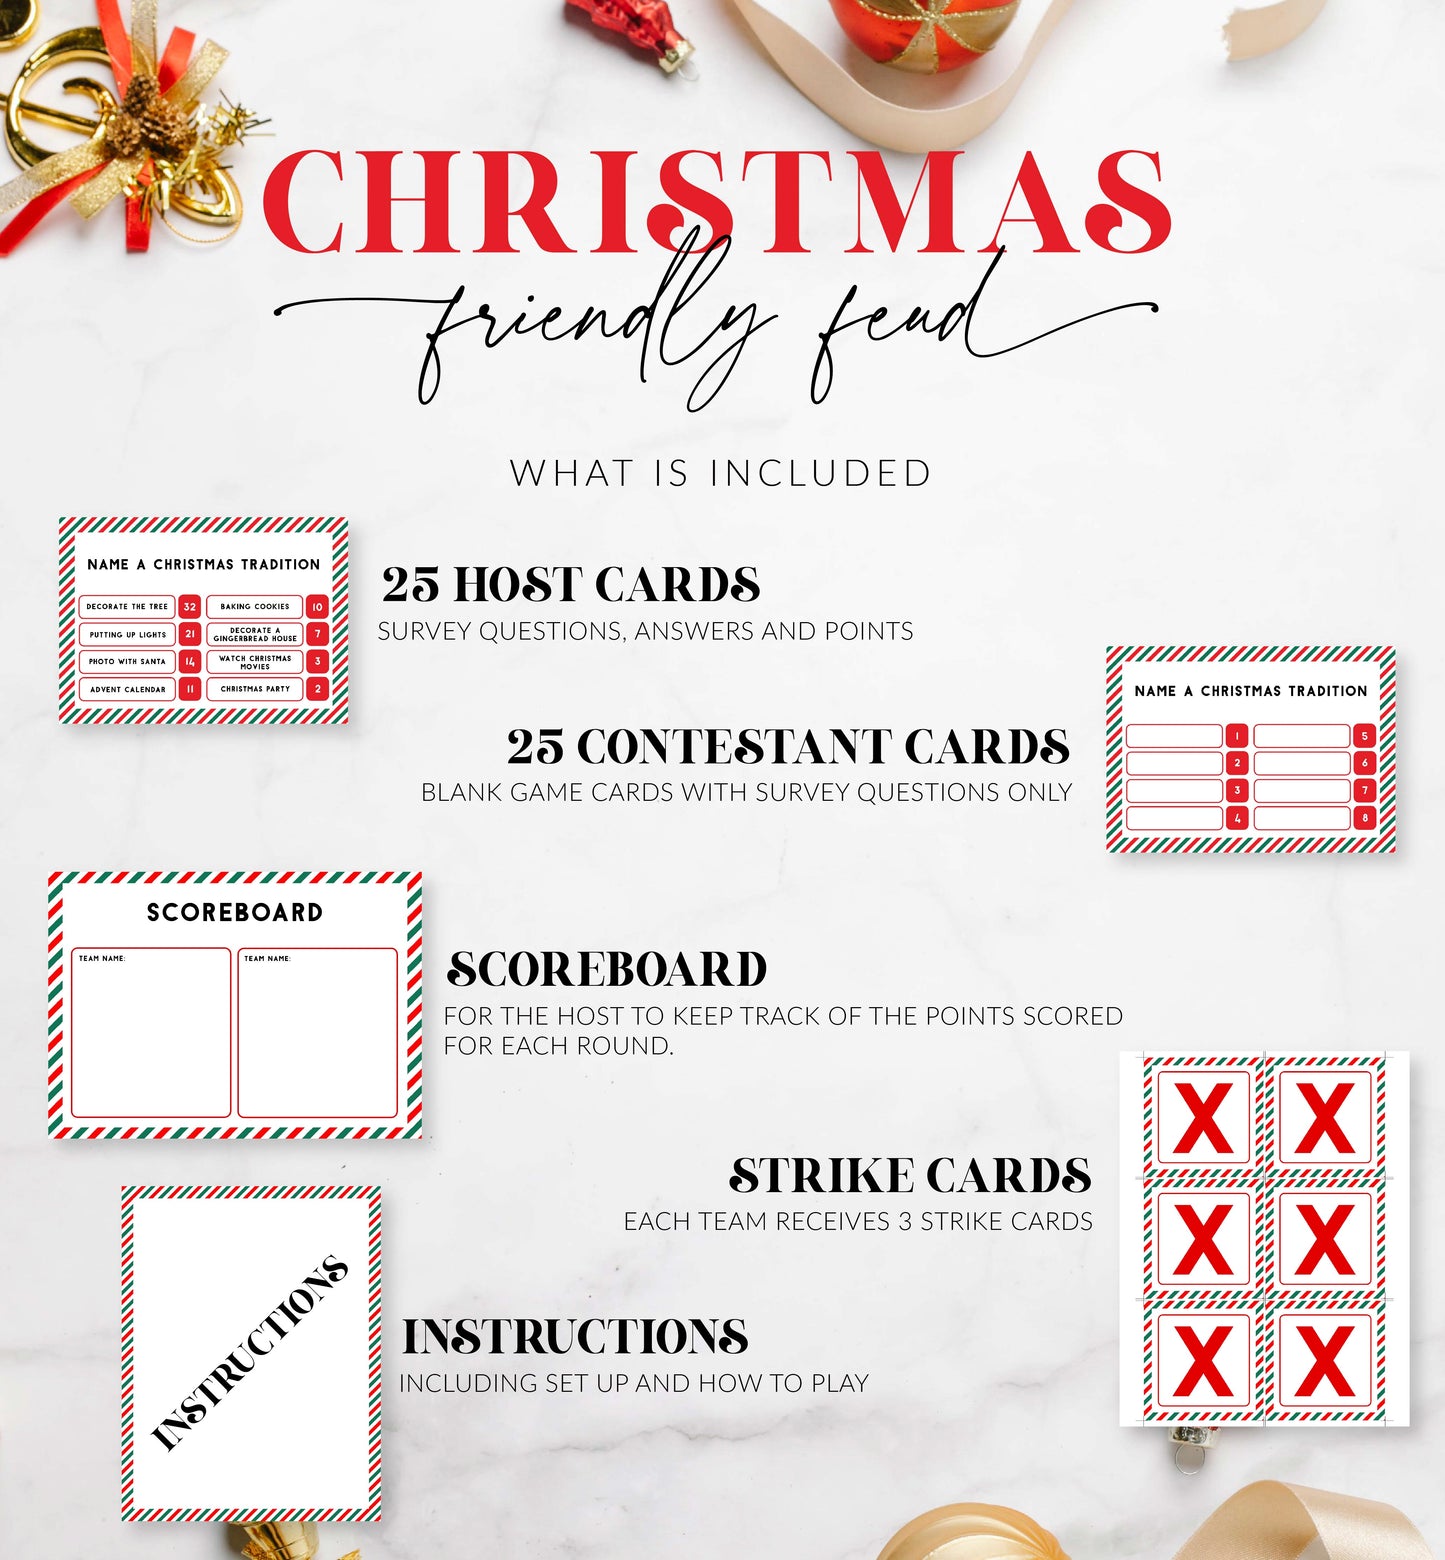 Christmas Friendly Feud Game, Printable Christmas Game, Family Christmas Game, Holiday Party Games, Adult Christmas Party Game, Stripe